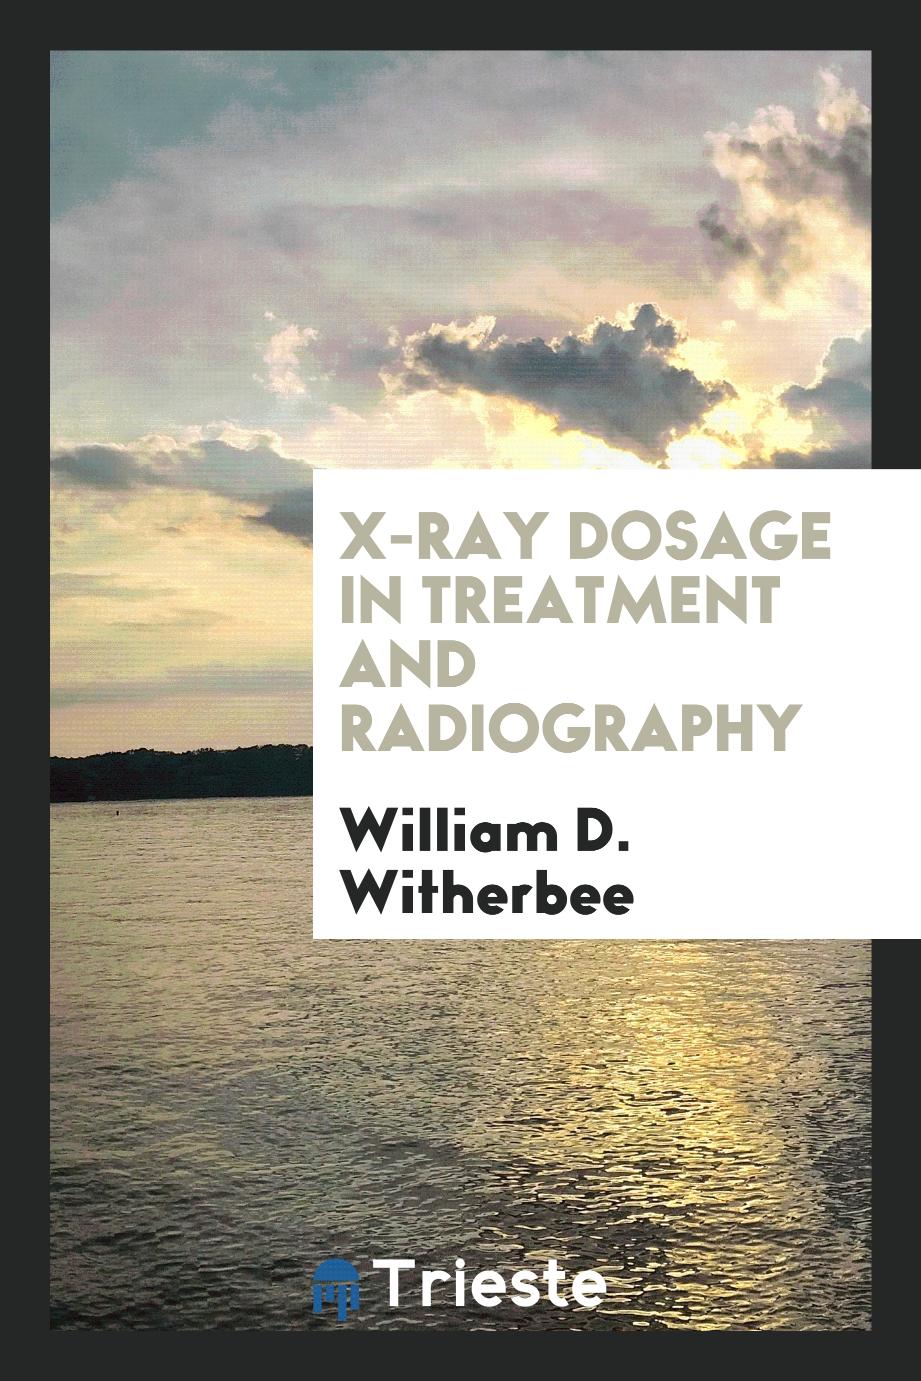 X-ray dosage in treatment and radiography